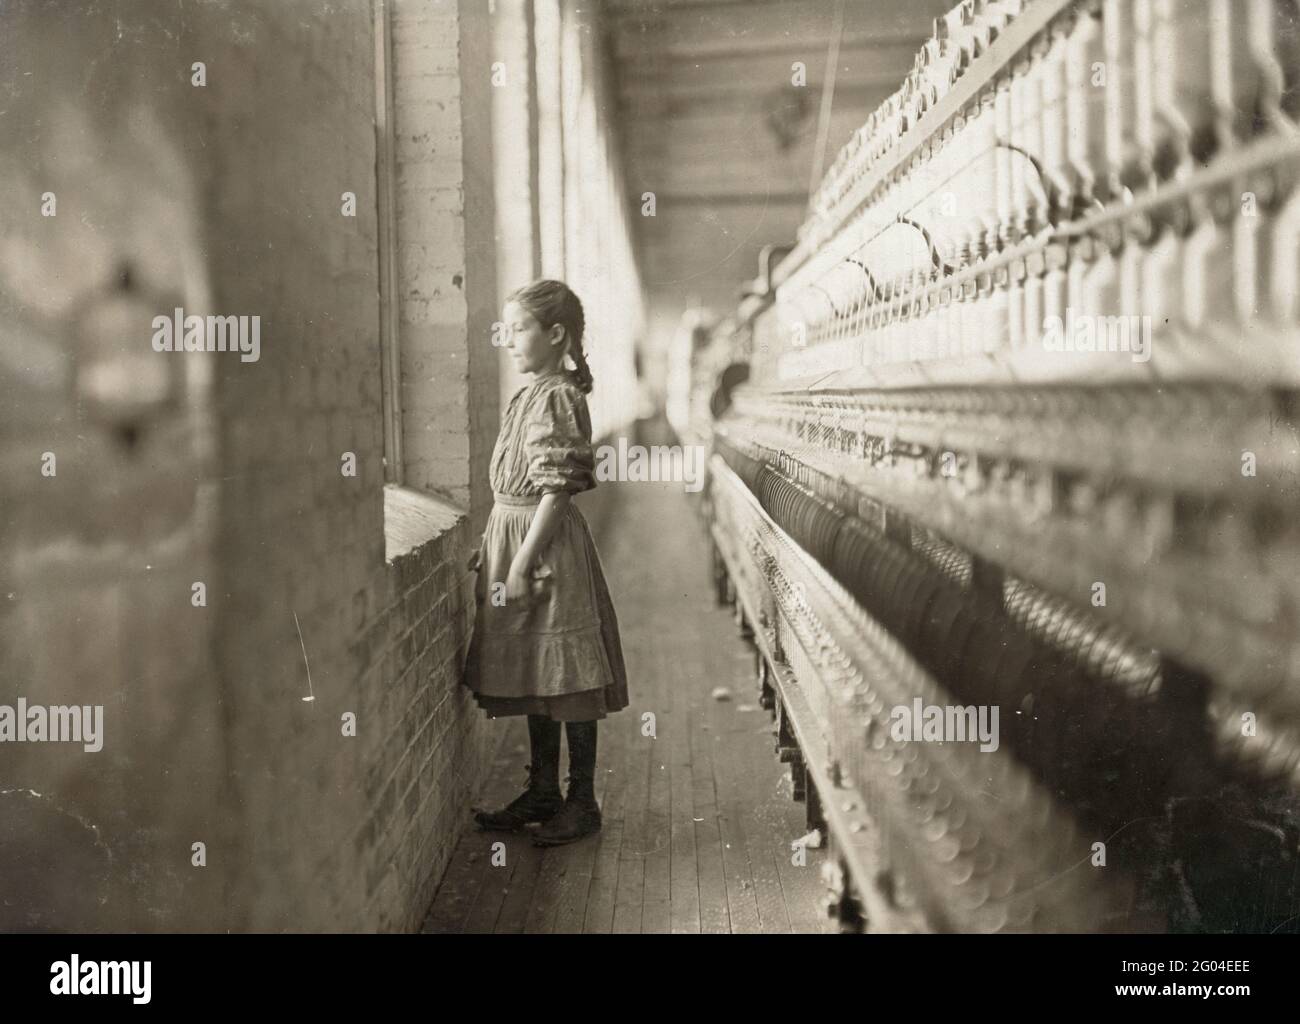 Child Labour: A ten year old spinner looking out of the window of her factory Stock Photo